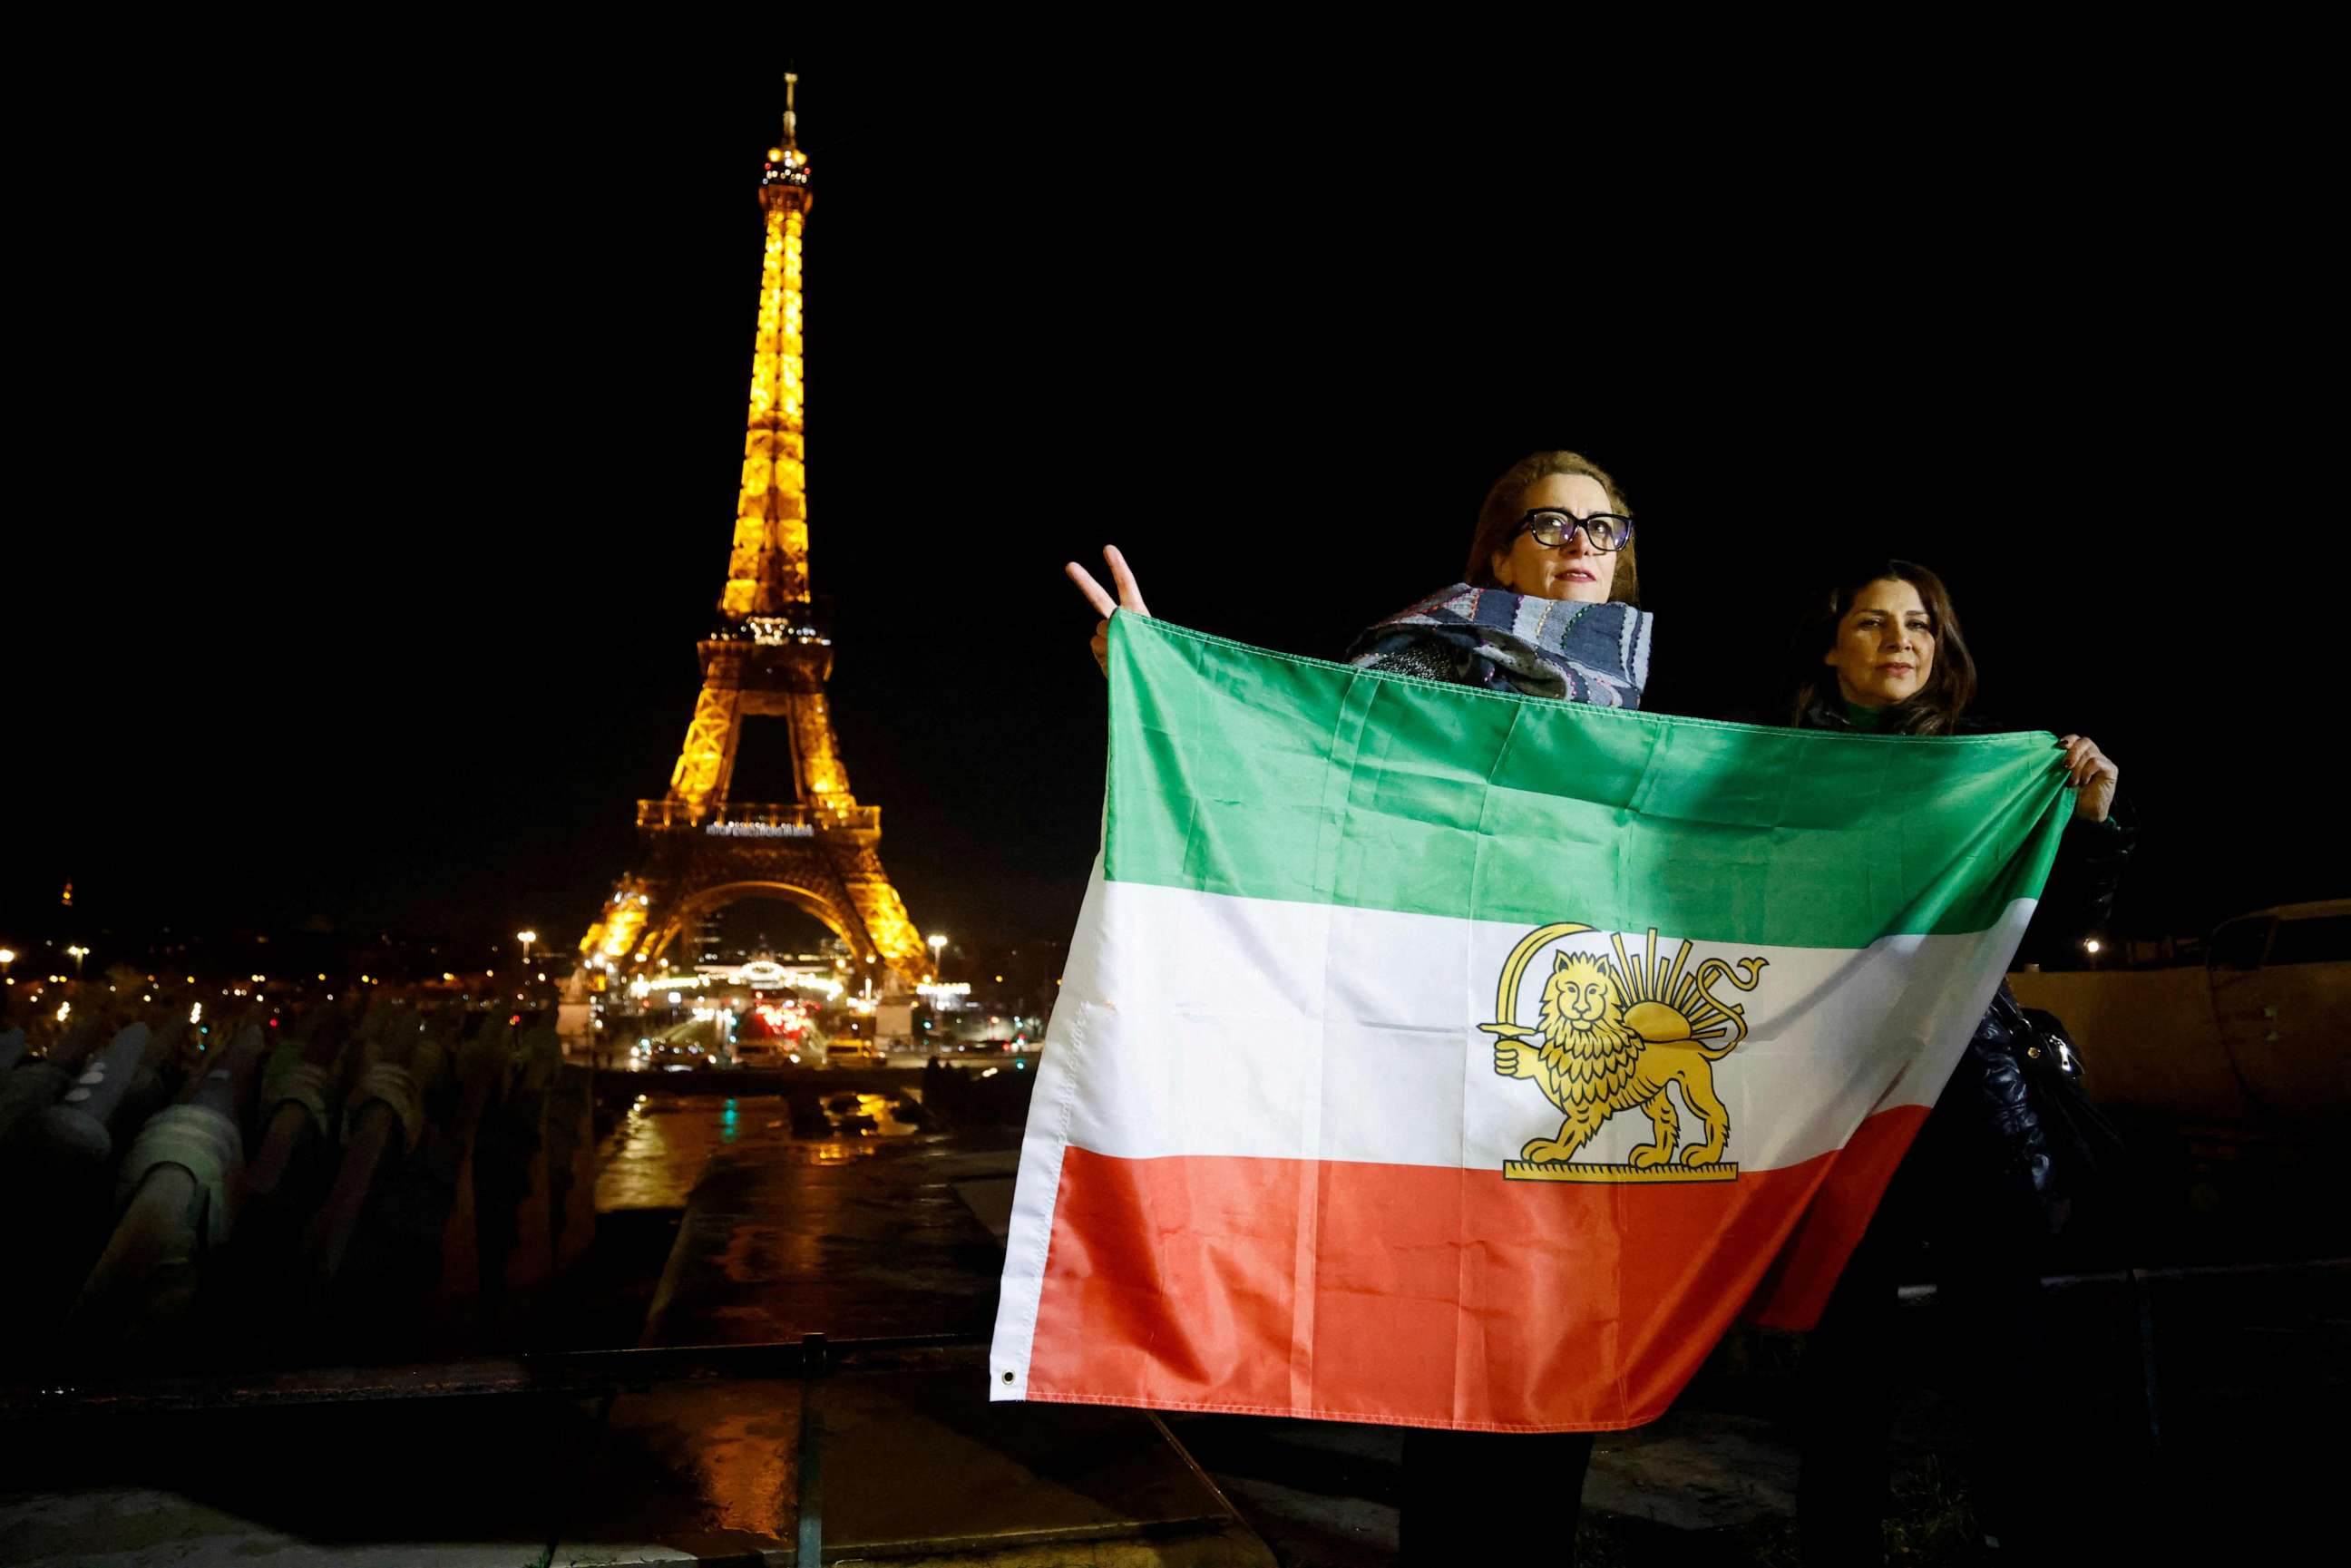 PHOTO: Protesters hold Iran's former flag on the Trocadero Esplanade Trocadero Esplanade during an event to display the slogan "Woman. Life. Freedom." on the Eiffel Tower, in a show of support to the Iranian people, in Paris, on Jan. 16, 2023.